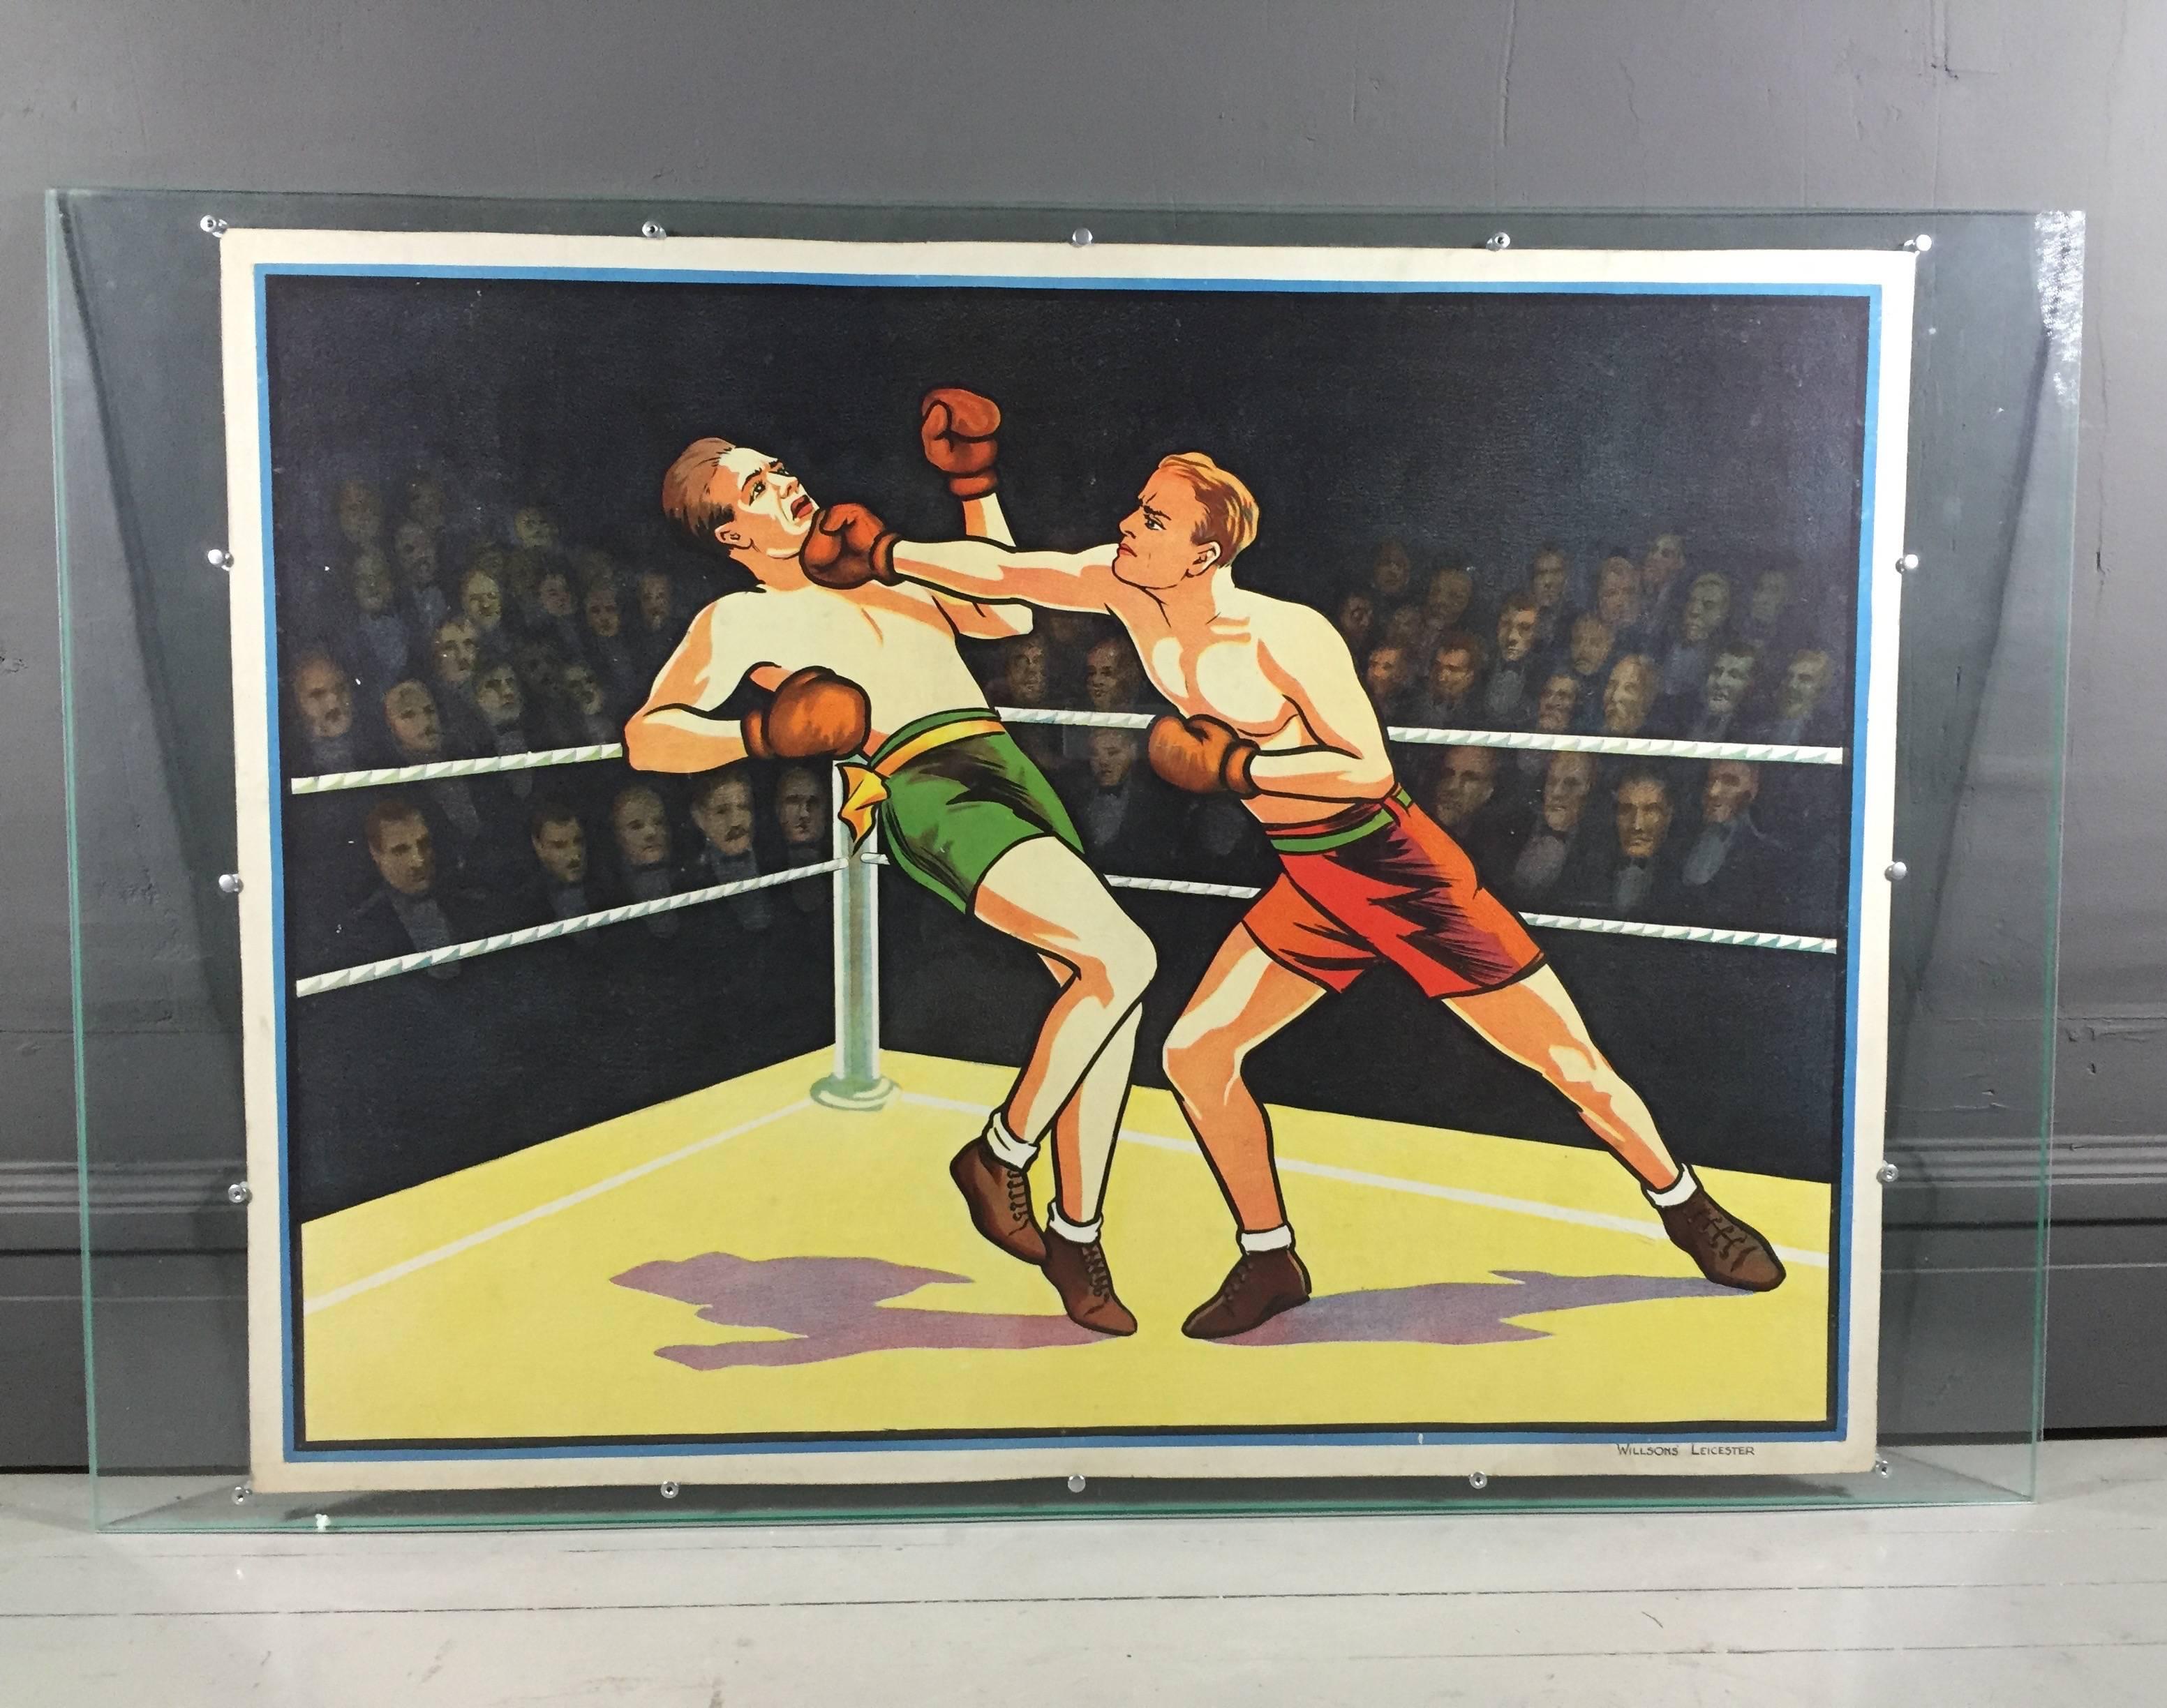 Spectacular lithograph of two boxers printed by Willsons' Leicester in England printed late 1930s or early 1940s. Excellent condition of print mounted on pressed paperboard. Framed between two very heavy sheets of plexiglass and supported with 16